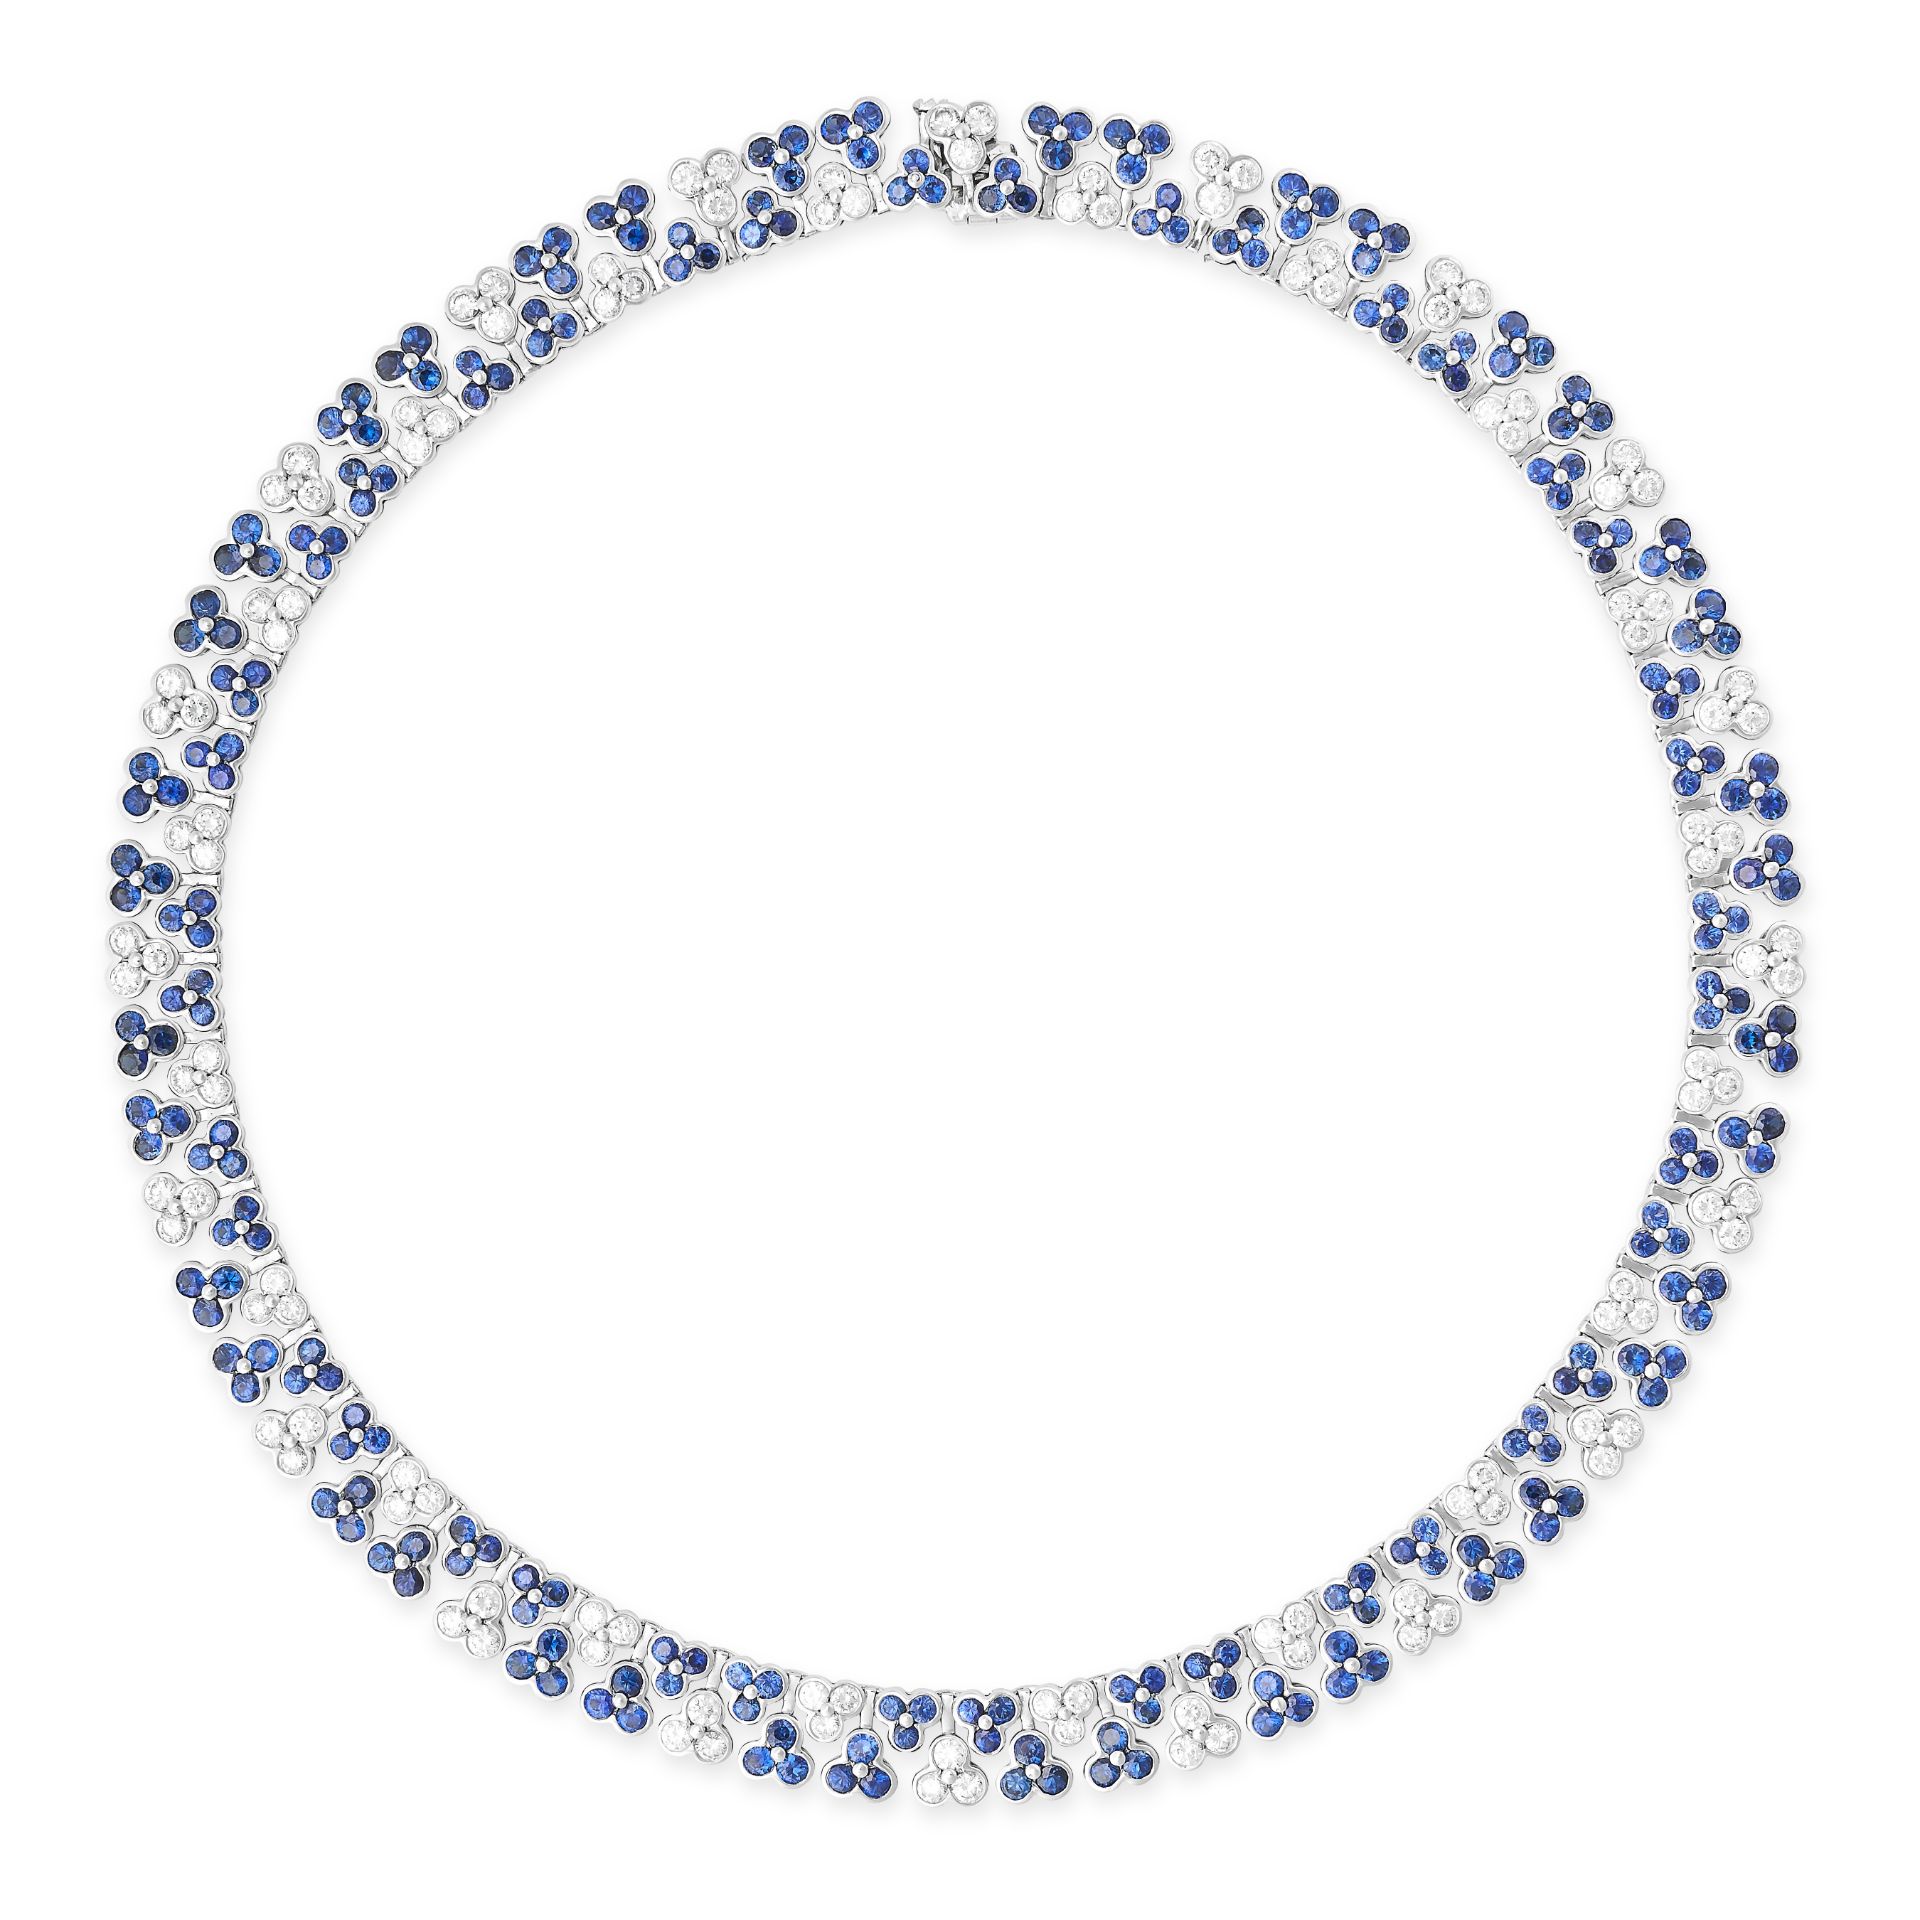 BULGARI, A VINTAGE SAPPHIRE AND DIAMOND NECKLACE in platinum and 18ct white gold, set with two